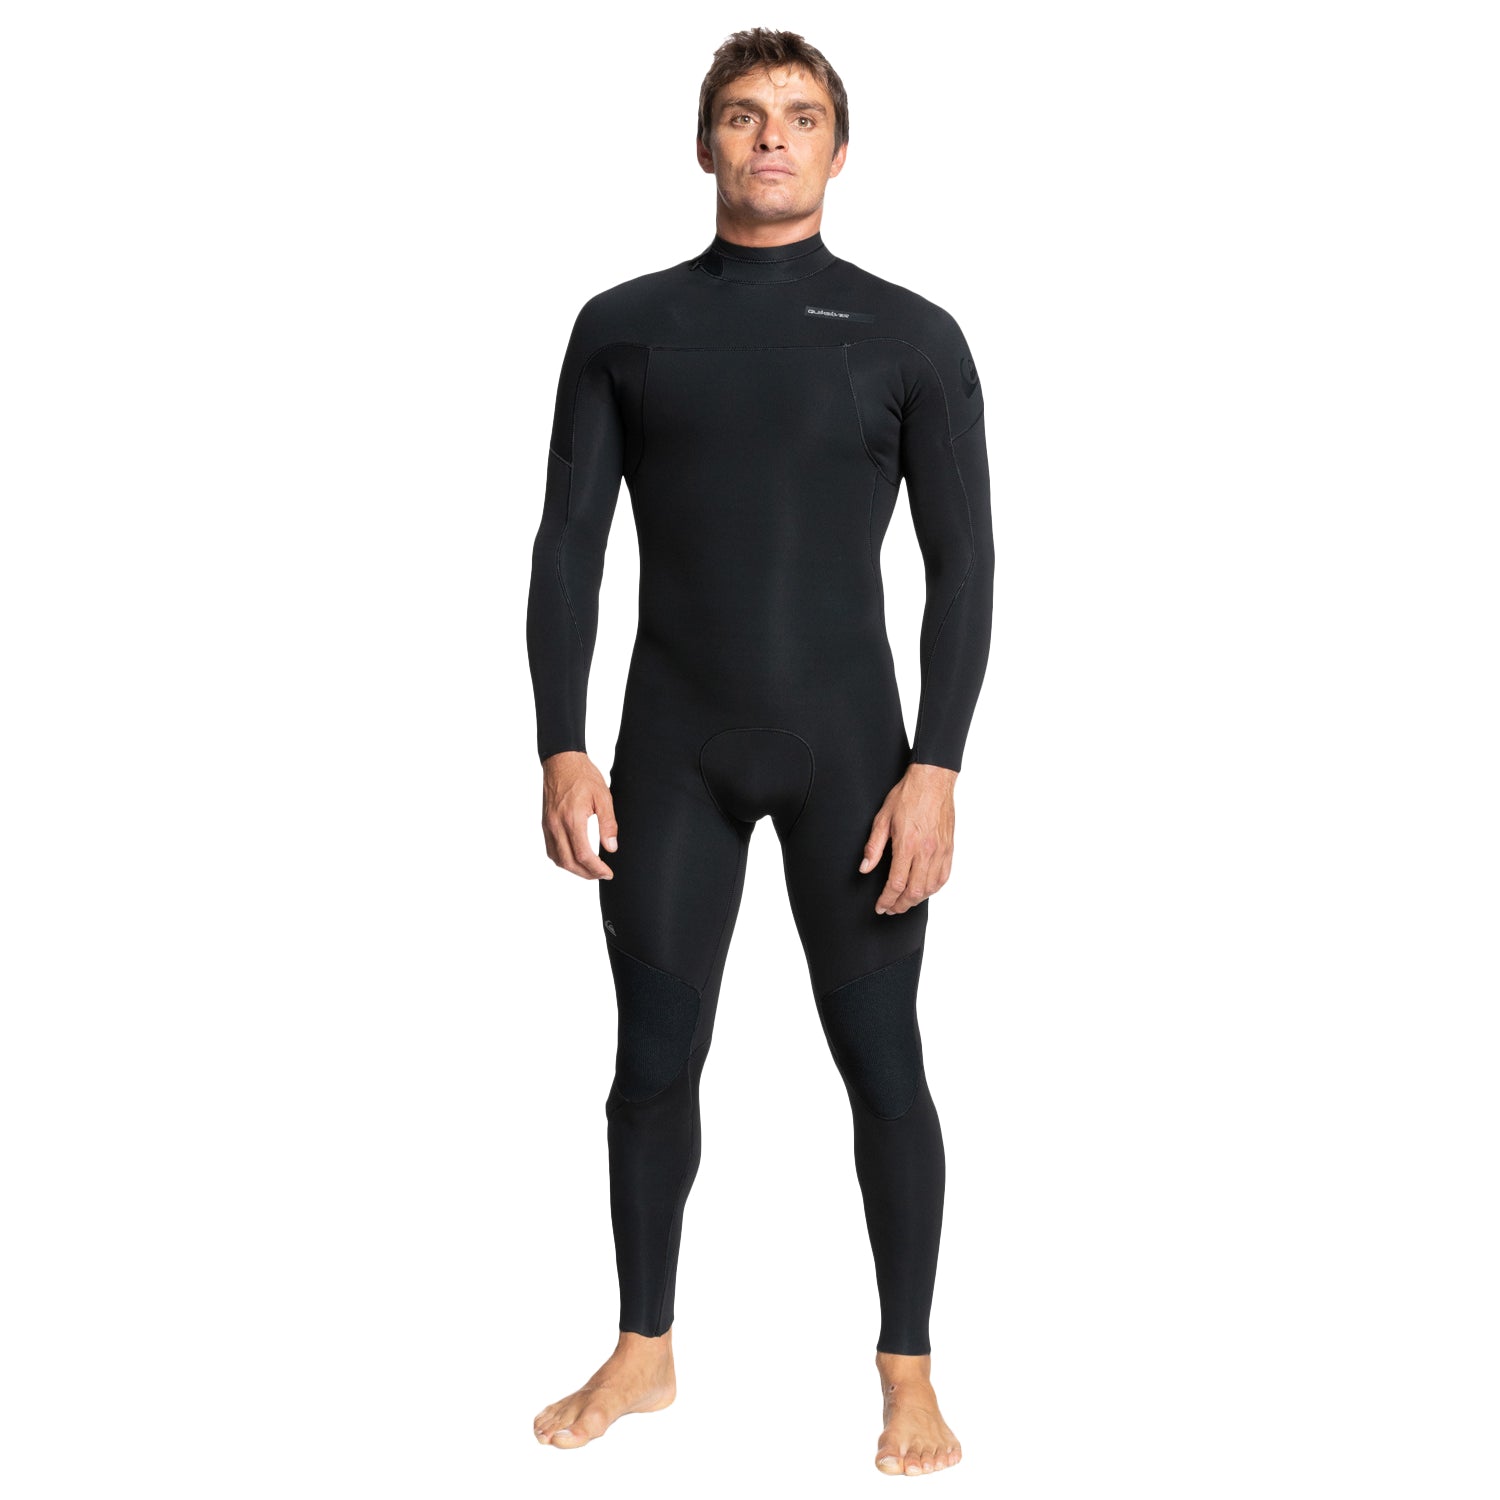 Quiksilver 3/2mm Everyday Sessions Back Zip Wetsuit KVD0 M